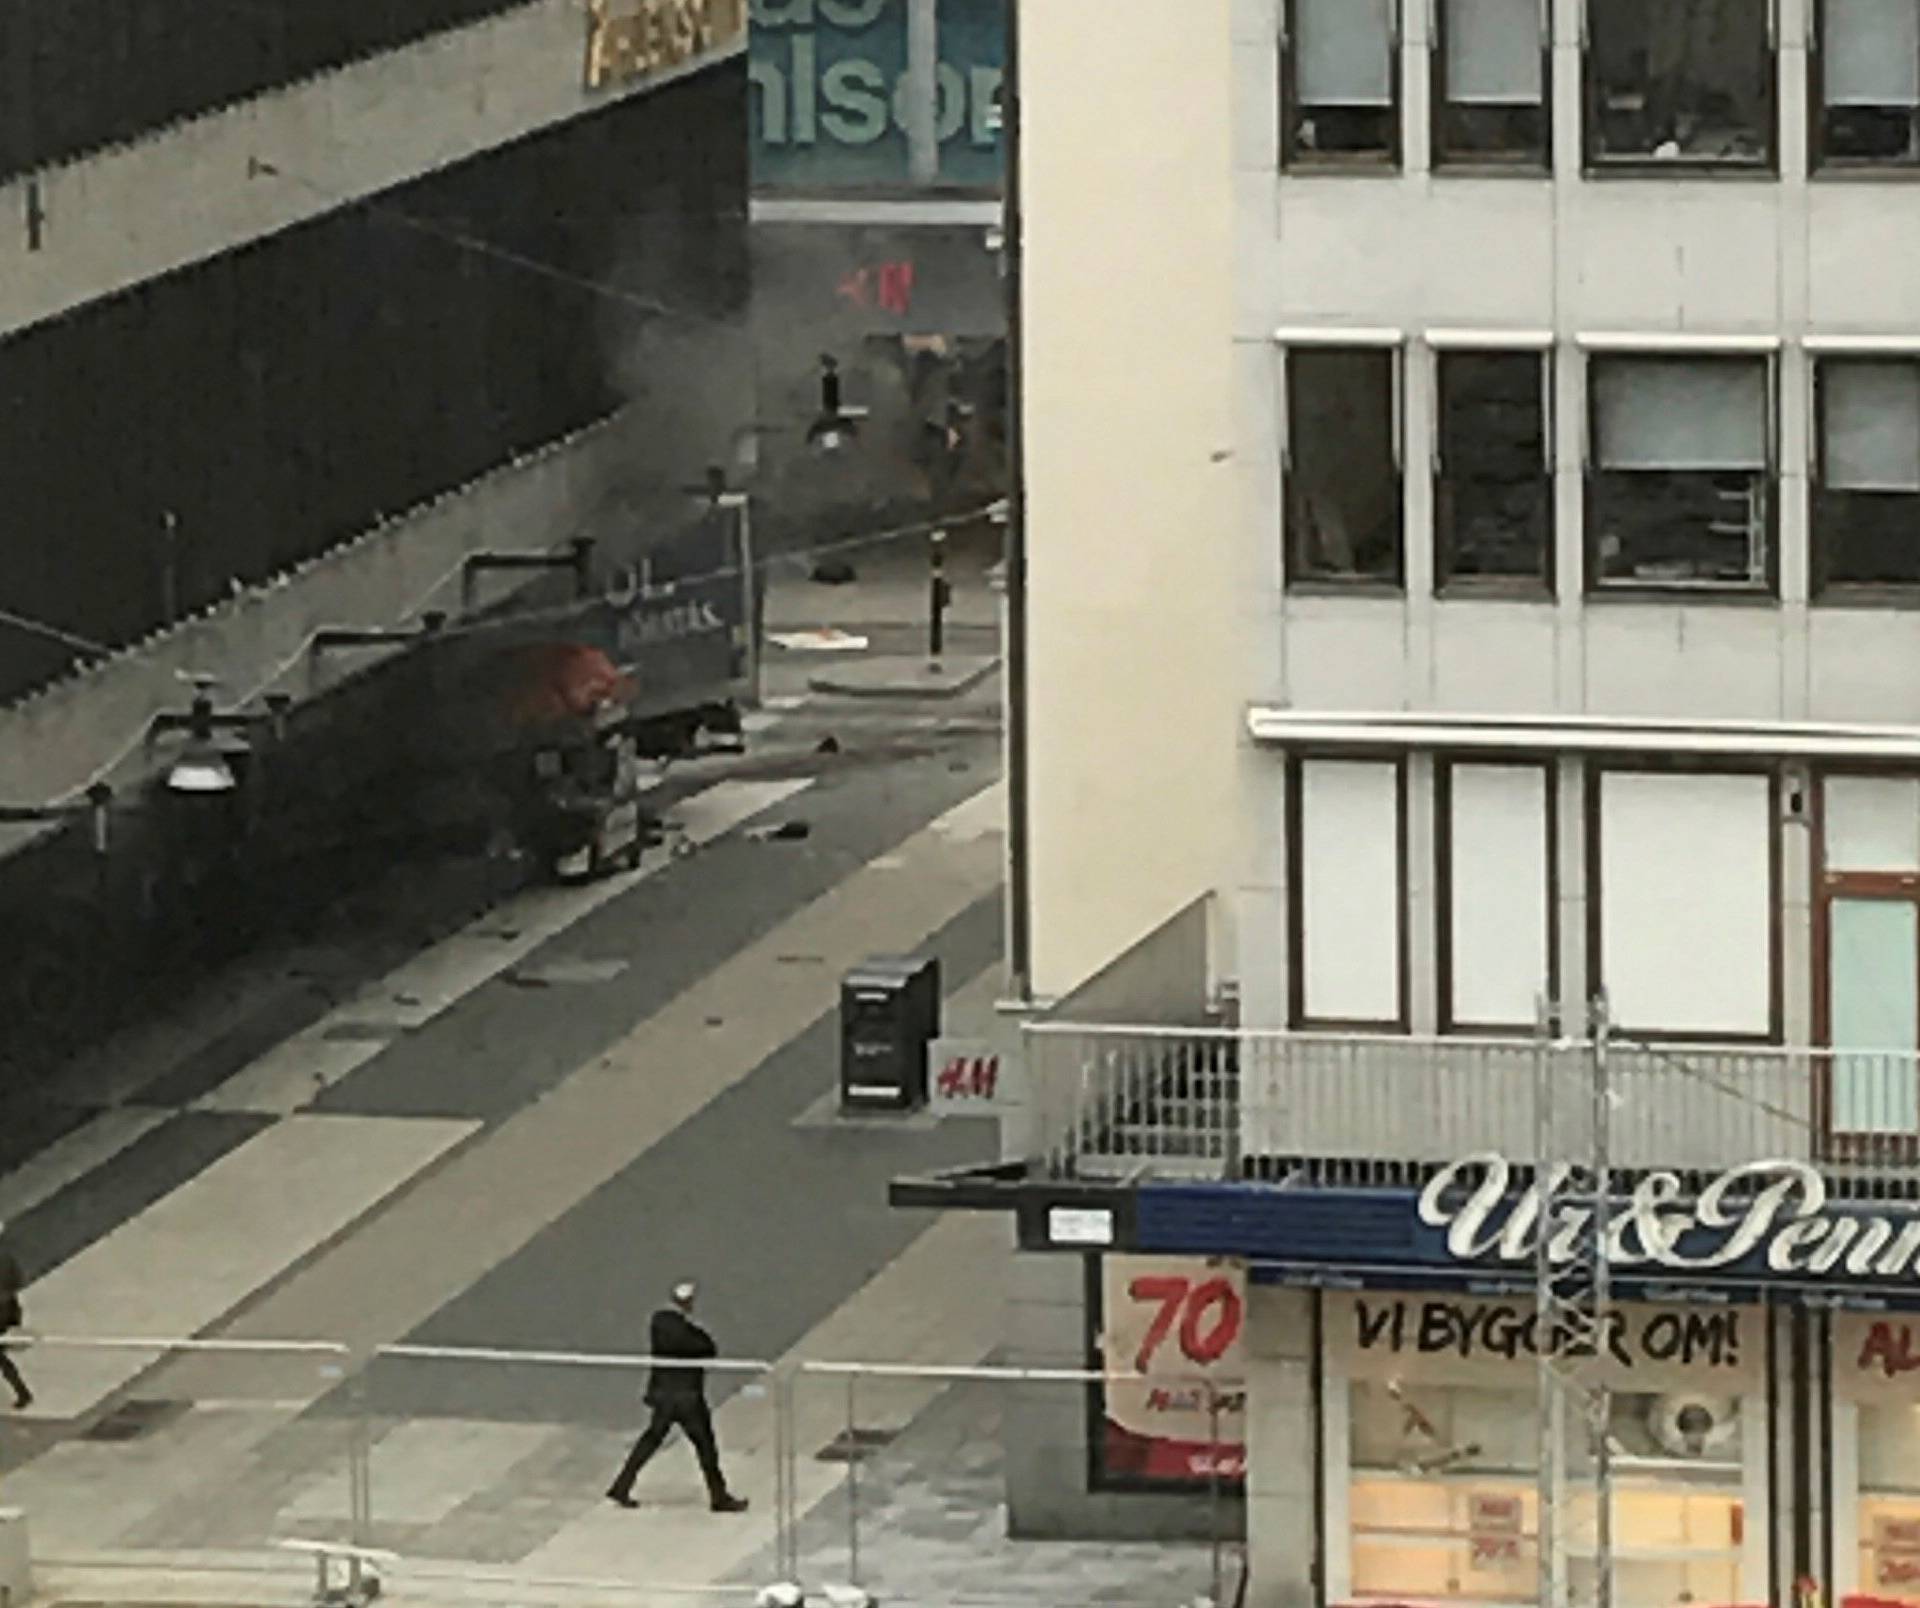 A truck have crashed into a department store Ahlens at Drottninggatan in the central of Stockholm